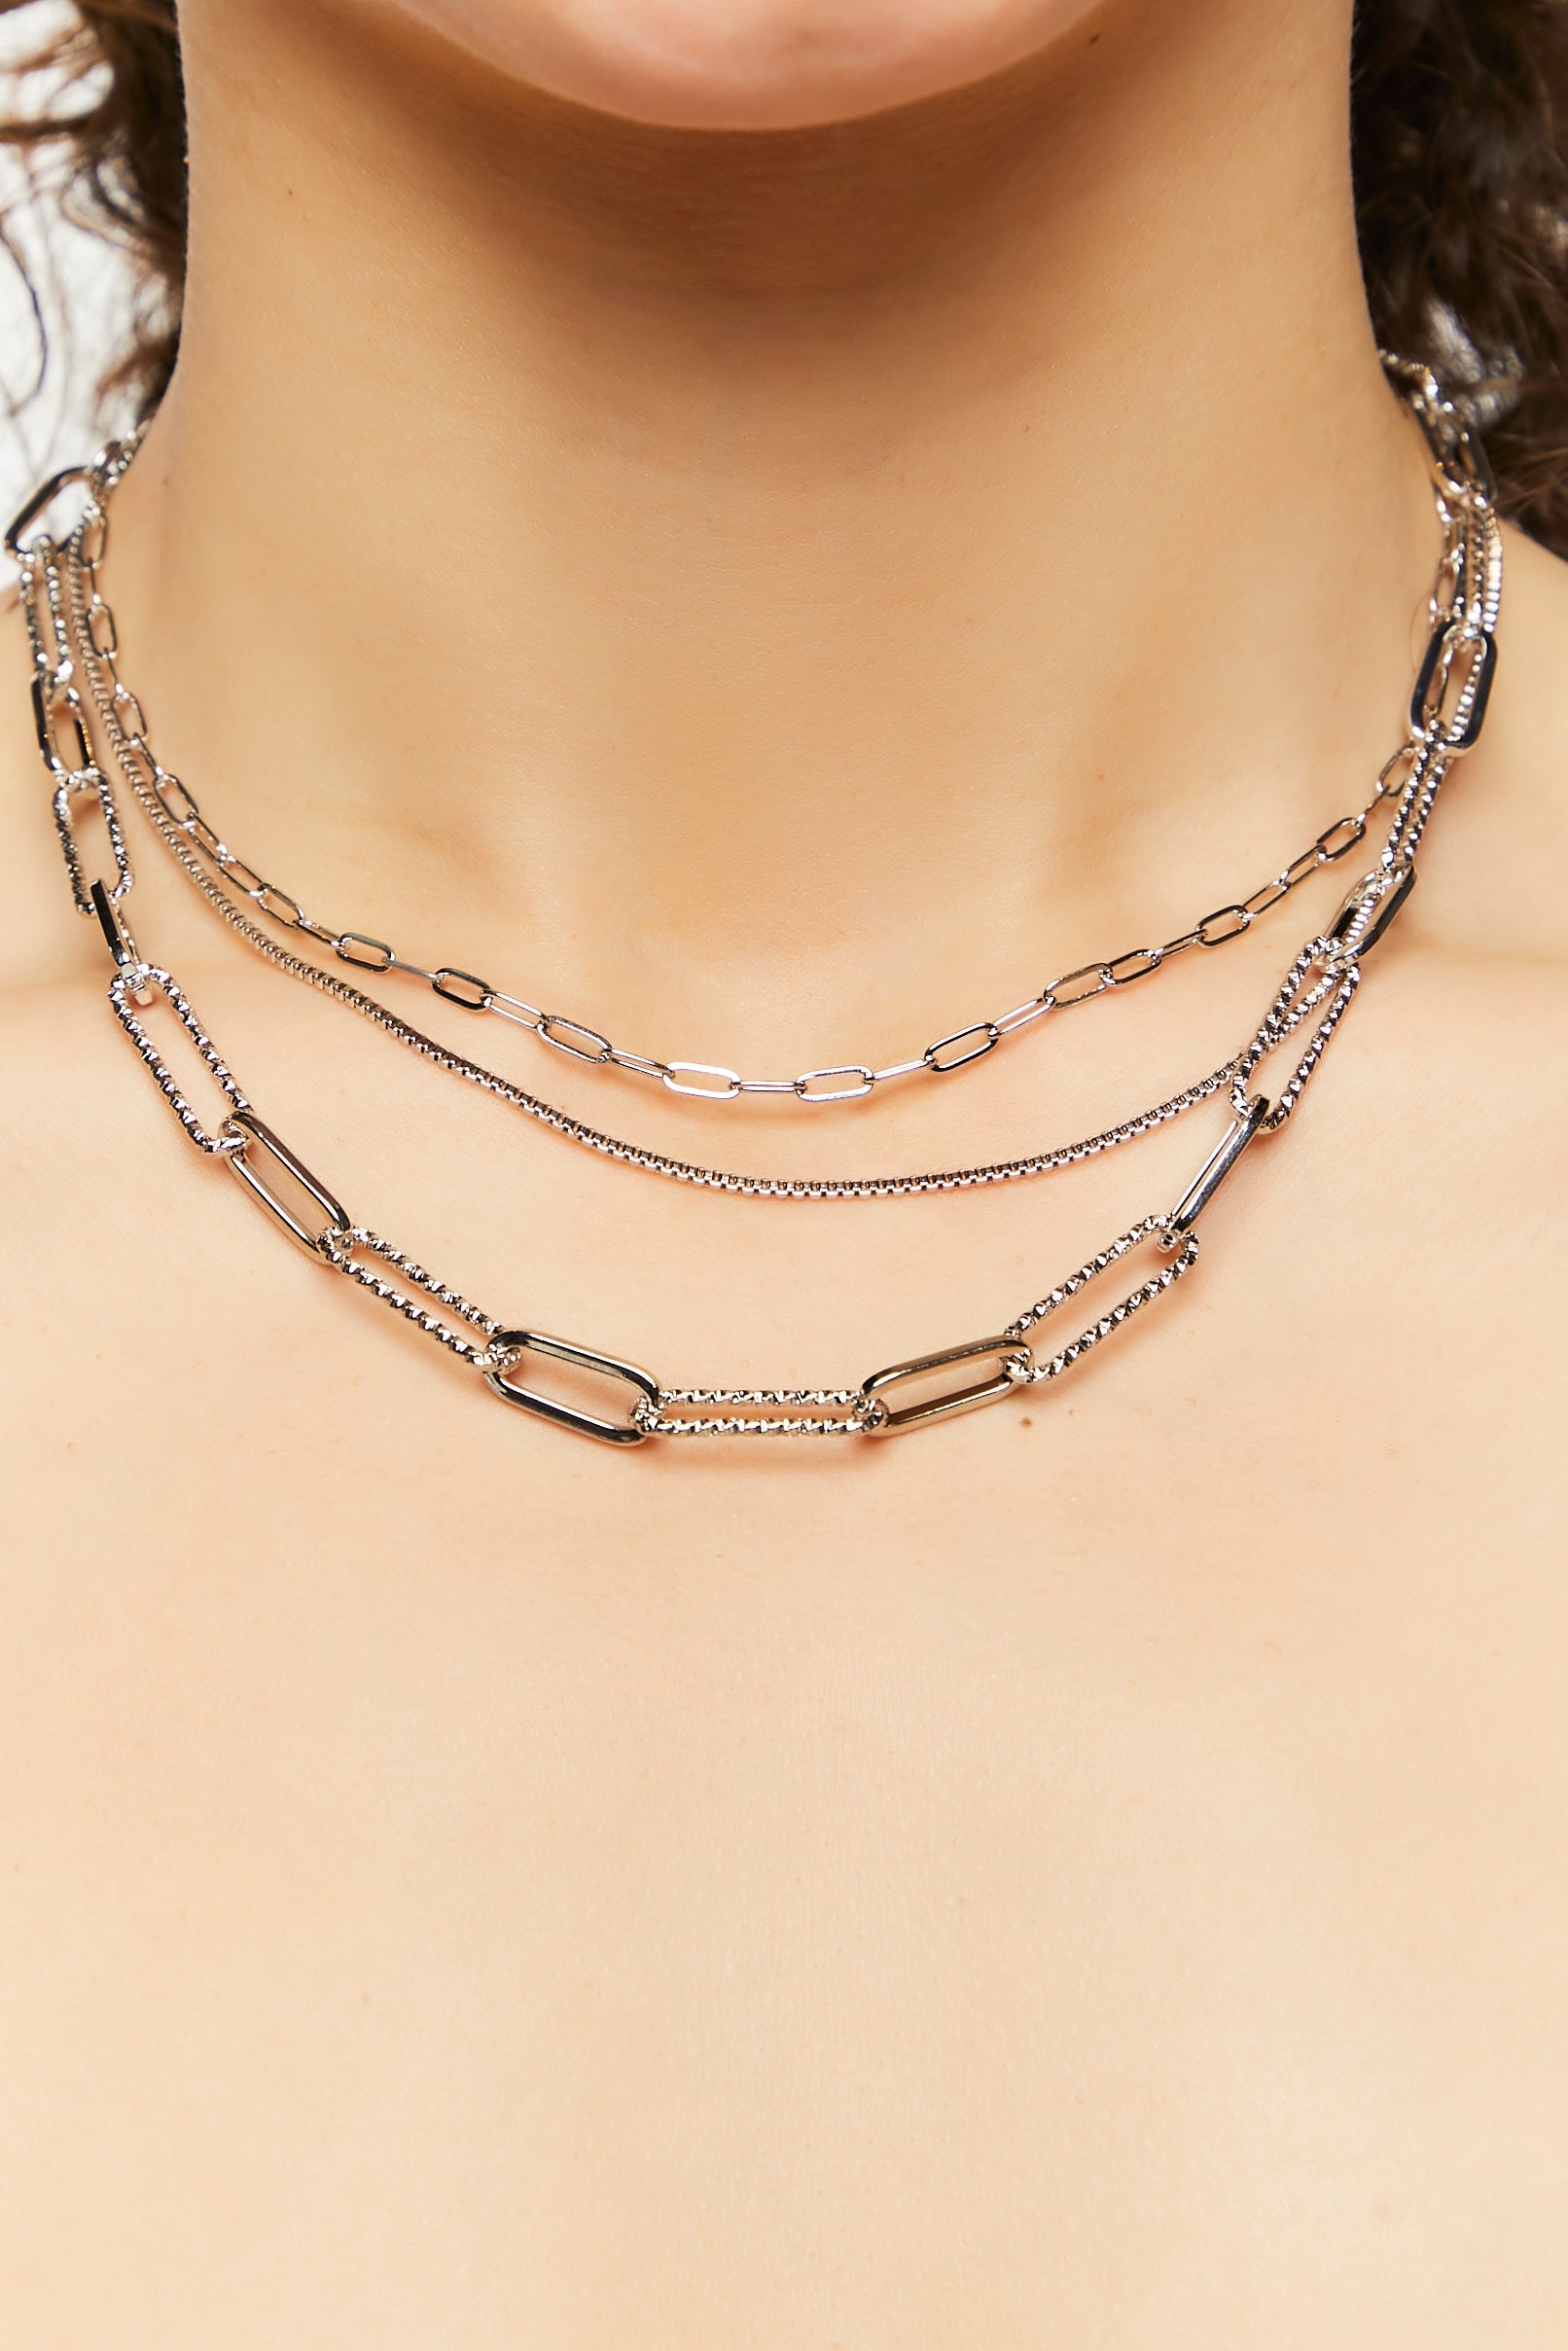 Silver Upcycled Layered Cable Chain Necklace